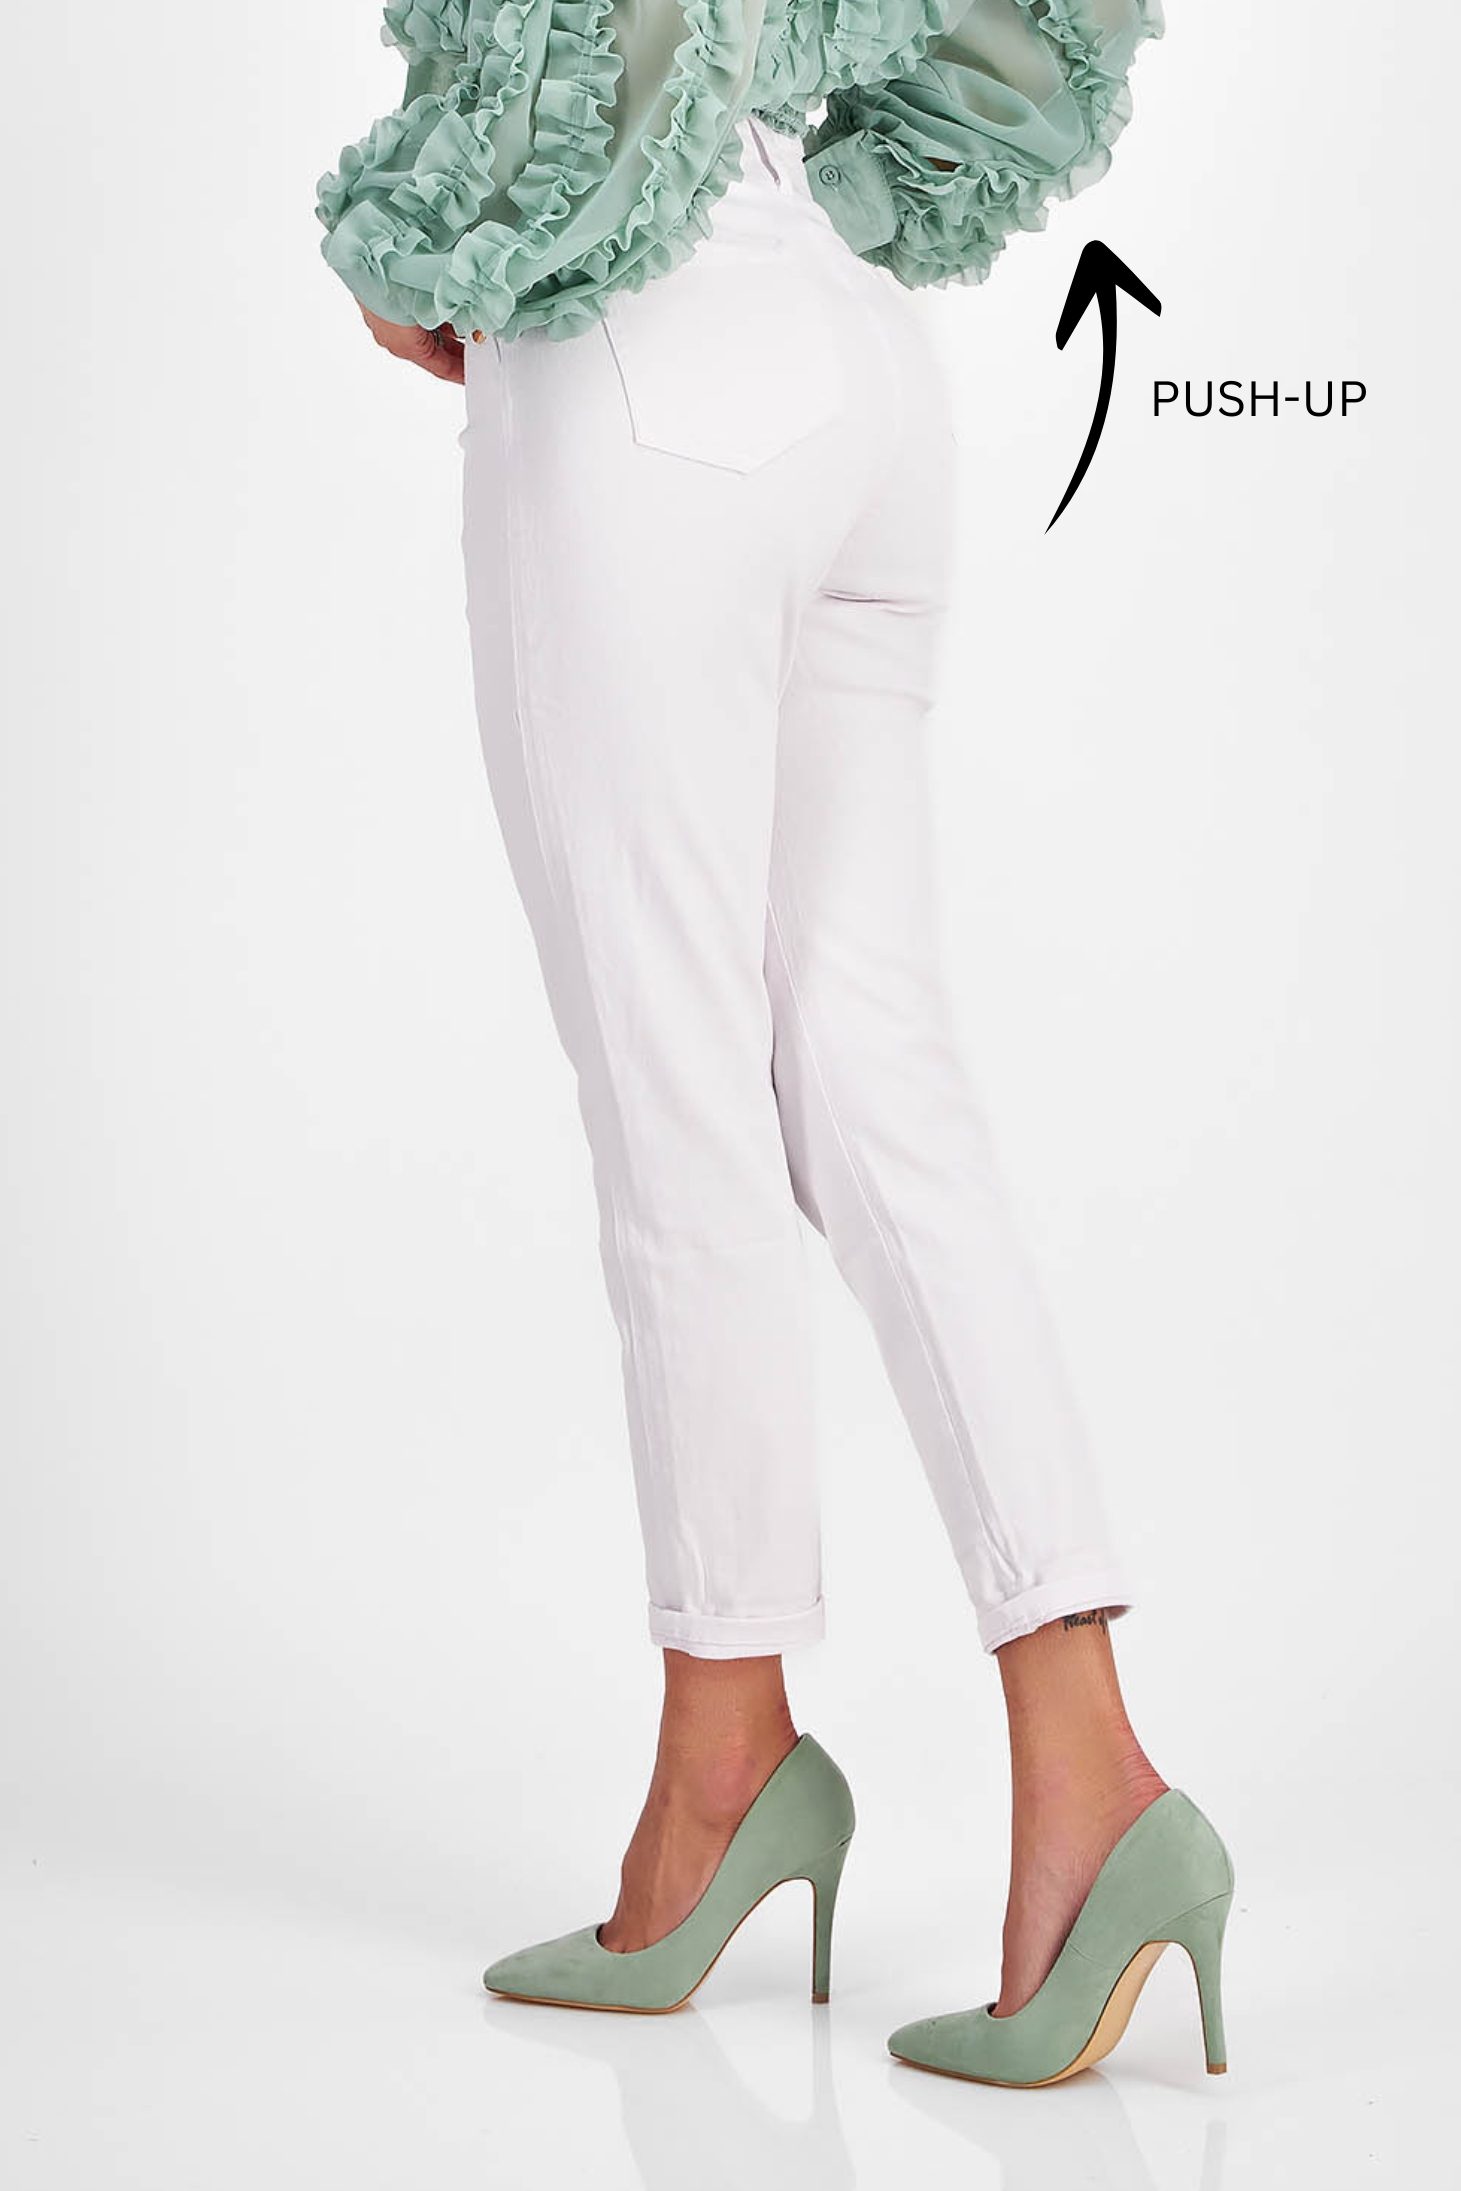 White High-Waisted Skinny Jeans with Push-Up Effect - SunShine